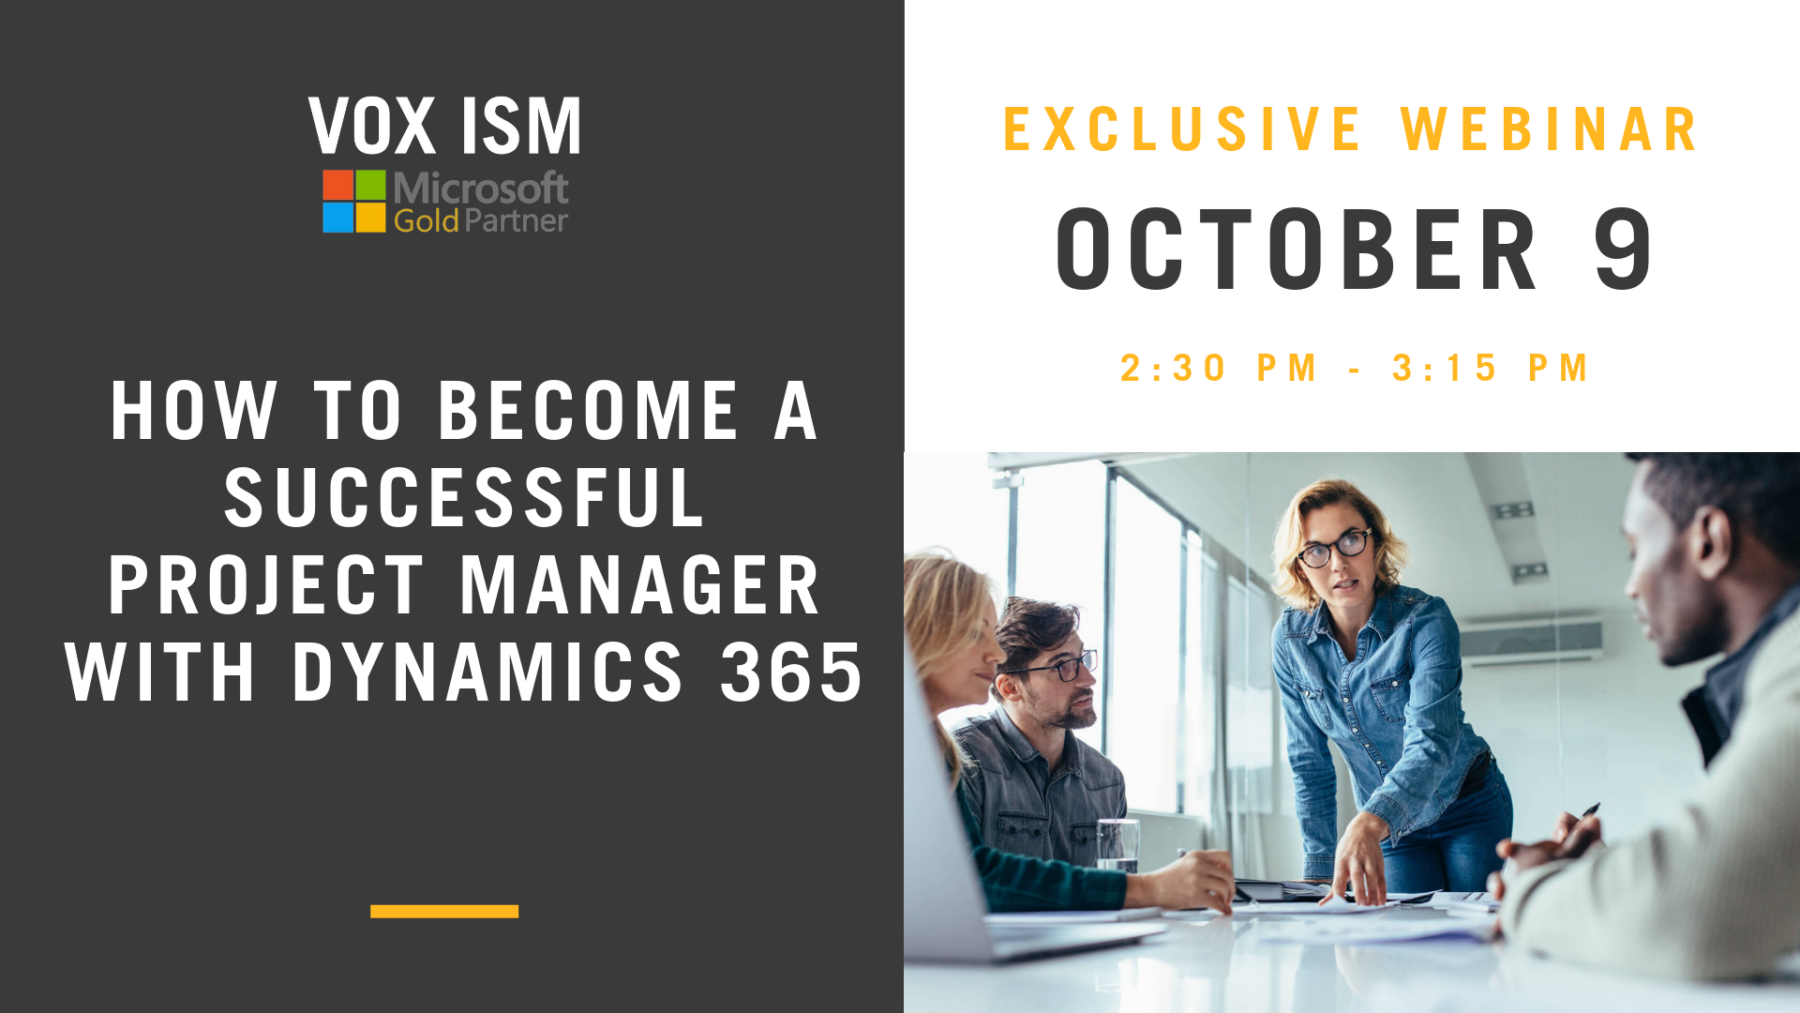 How to become a successful project manager with Dynamics 365 - October 9 - Webinar - VOX ISM